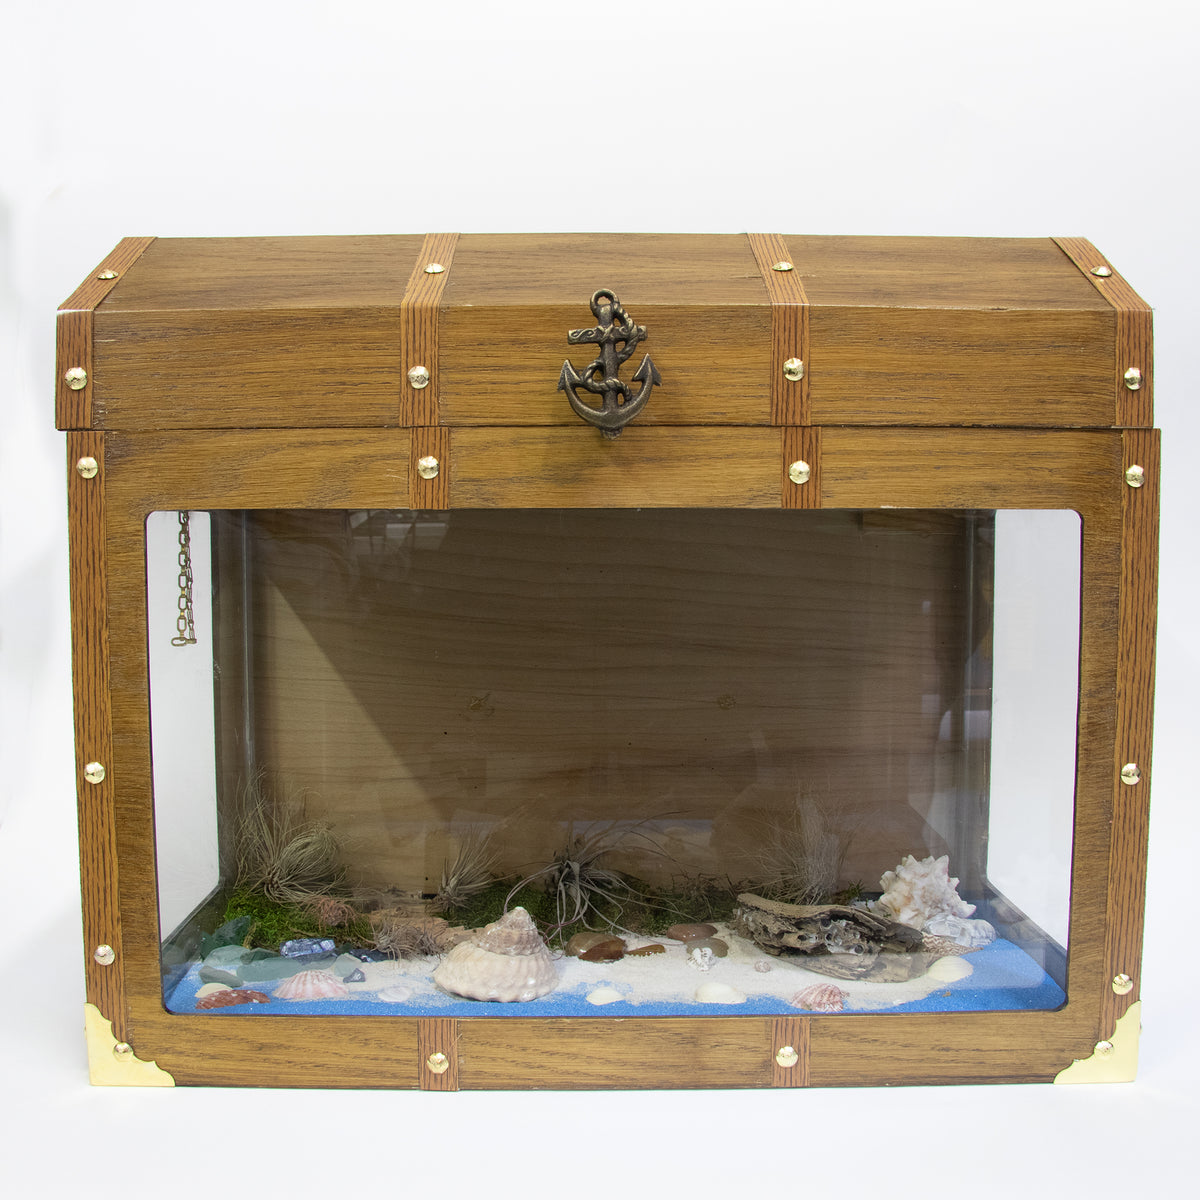 Tank Cover - Hand-made sea chest